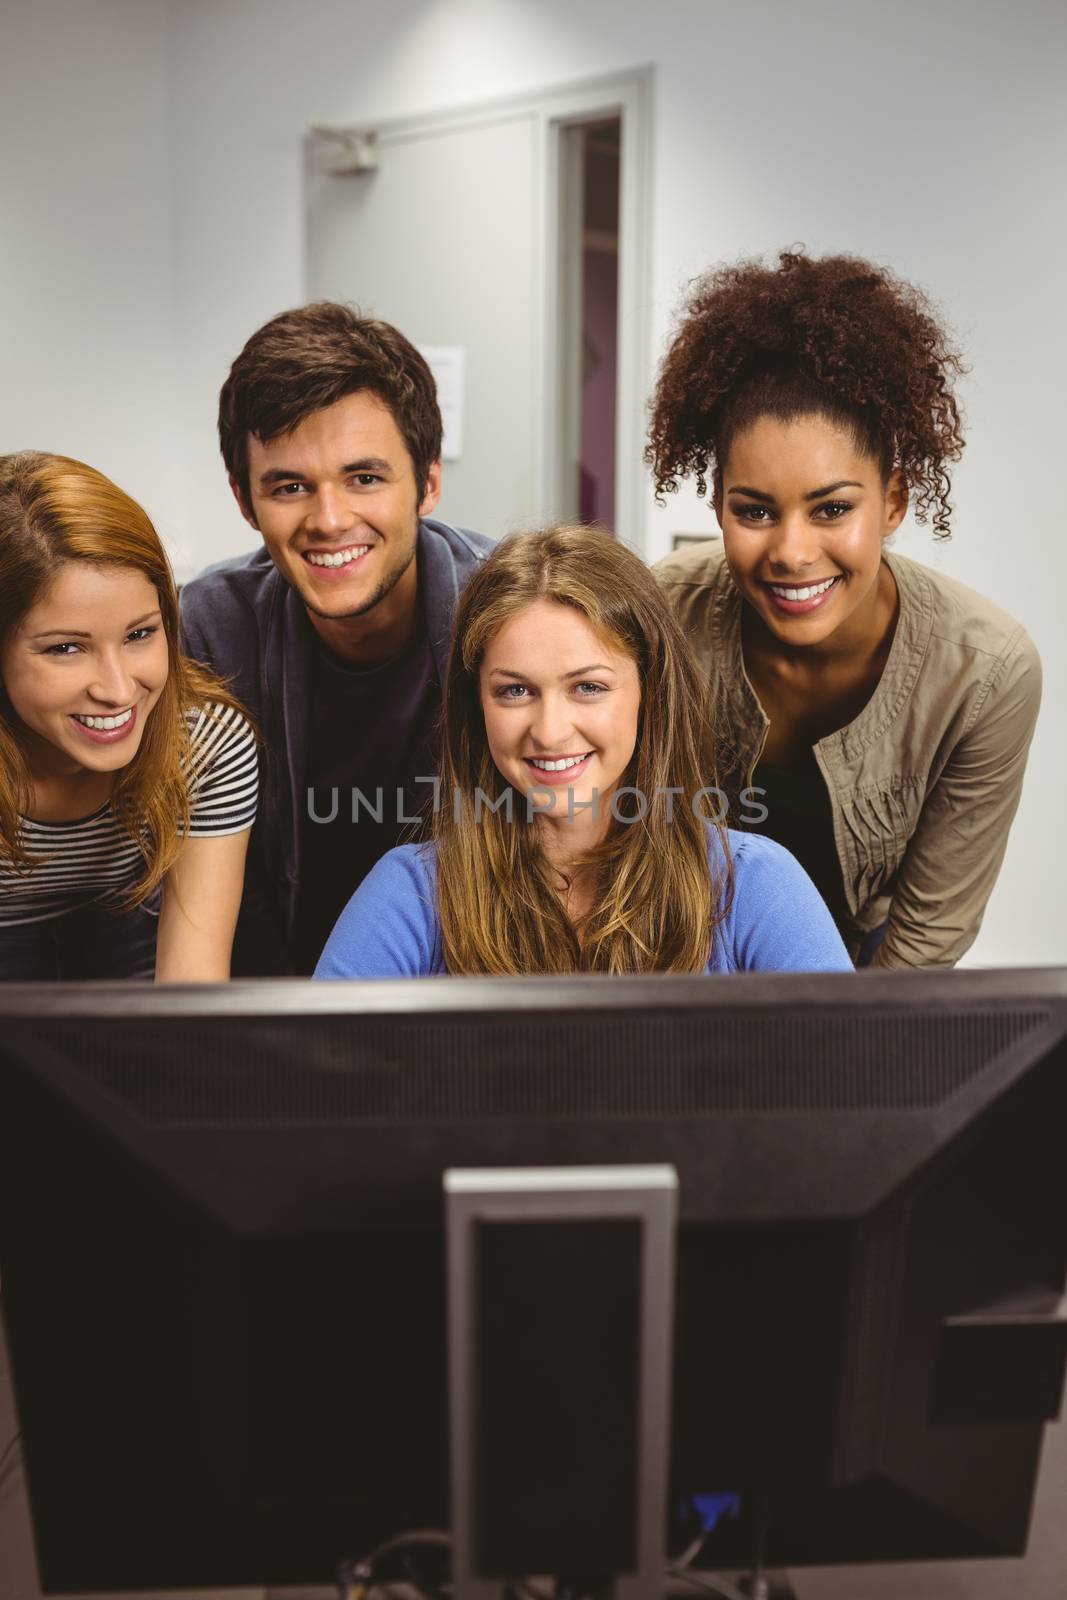 Smiling students using computer together looking at camera in classroom